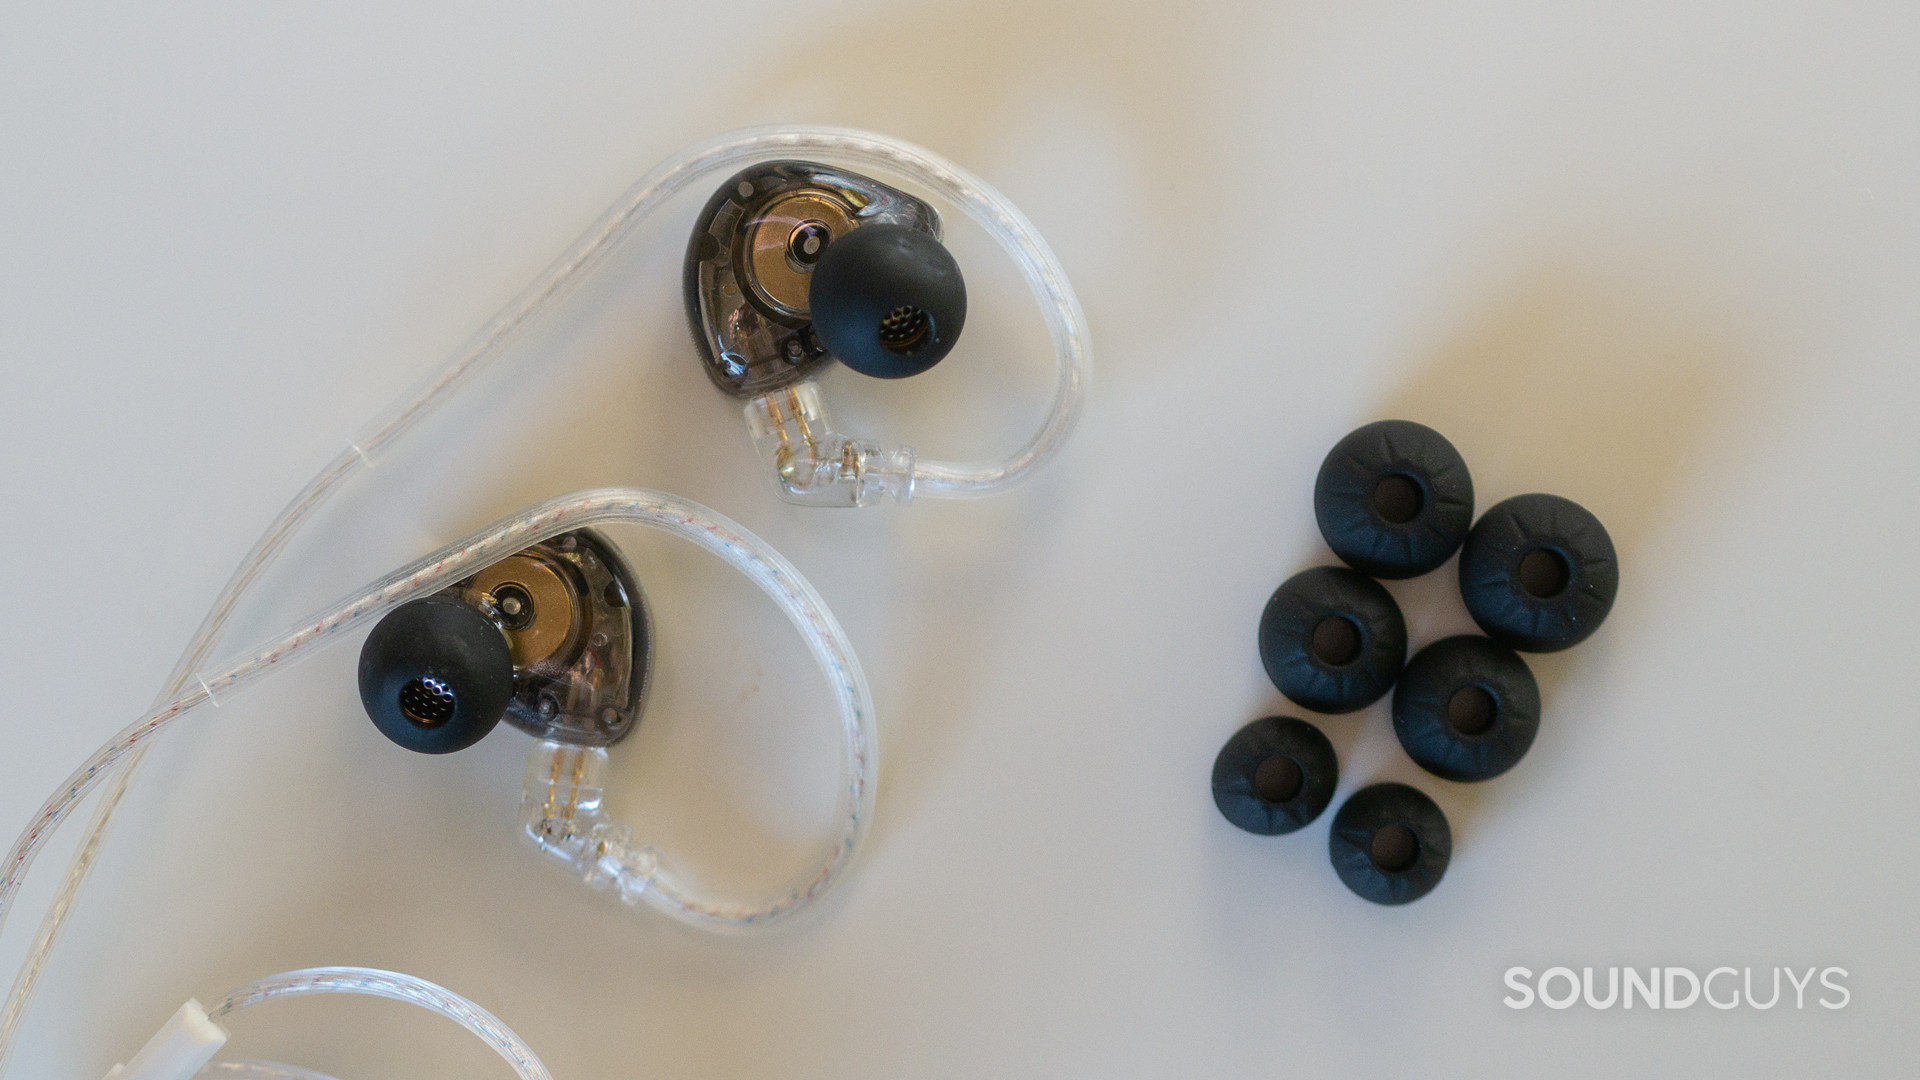 A photo of the KZ ZS10 Pro with its four sizes of silicone eartips.